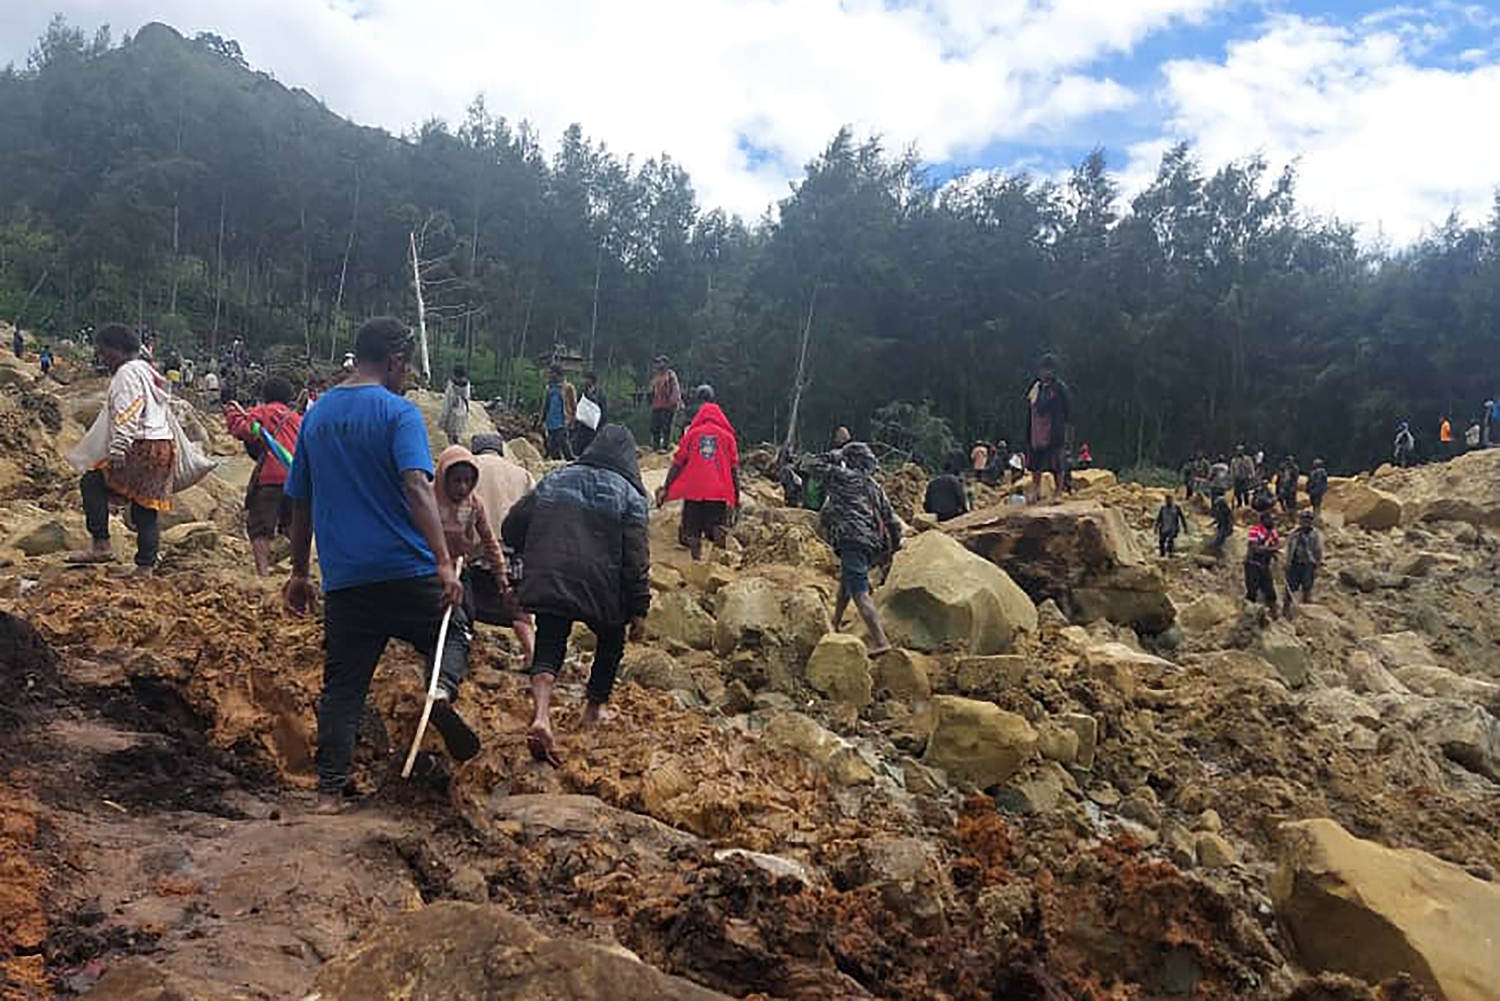 More than 670 feared dead after huge landslide in Papua New Guinea 